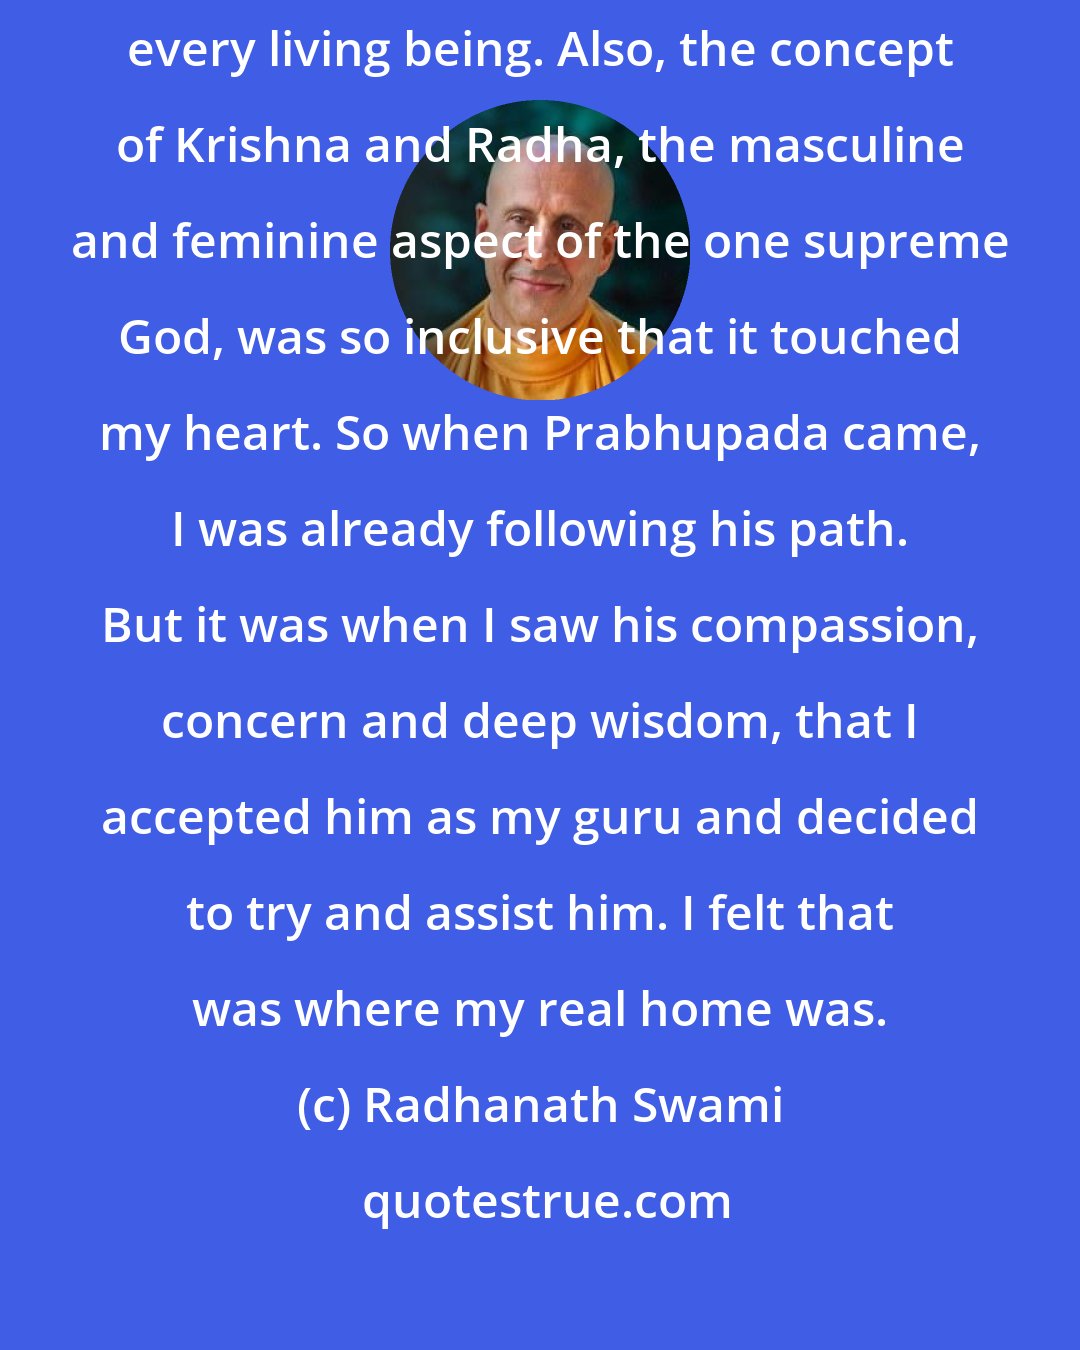 Radhanath Swami: When we awaken the love for God, that love naturally extends toward every living being. Also, the concept of Krishna and Radha, the masculine and feminine aspect of the one supreme God, was so inclusive that it touched my heart. So when Prabhupada came, I was already following his path. But it was when I saw his compassion, concern and deep wisdom, that I accepted him as my guru and decided to try and assist him. I felt that was where my real home was.